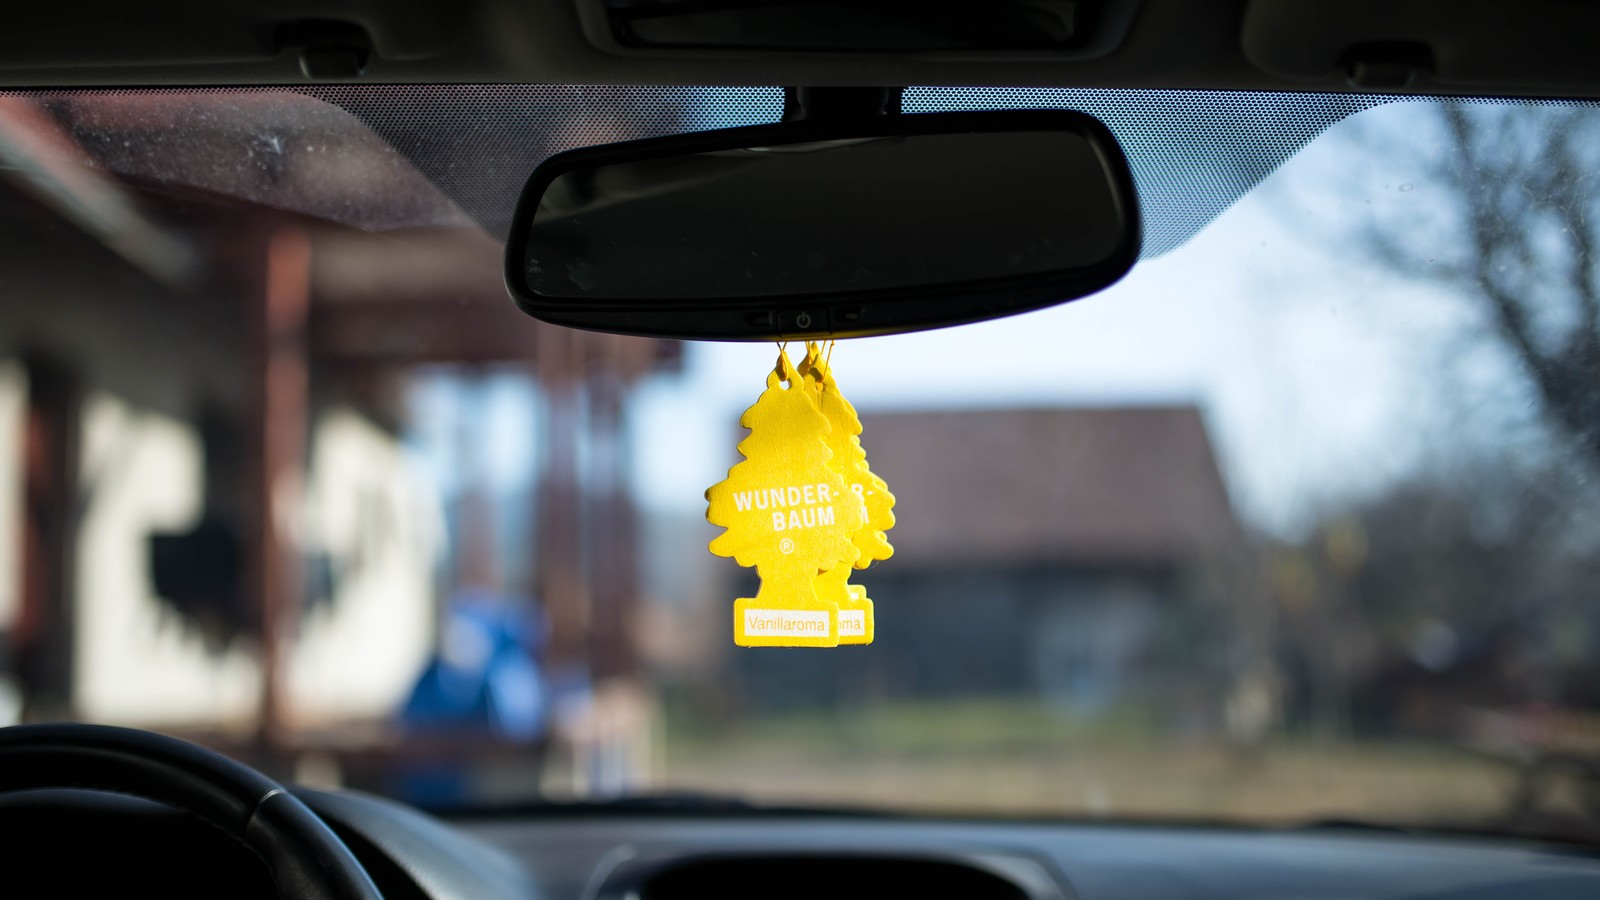 Why Do Ubers Have So Many Air Fresheners? - The Atlantic